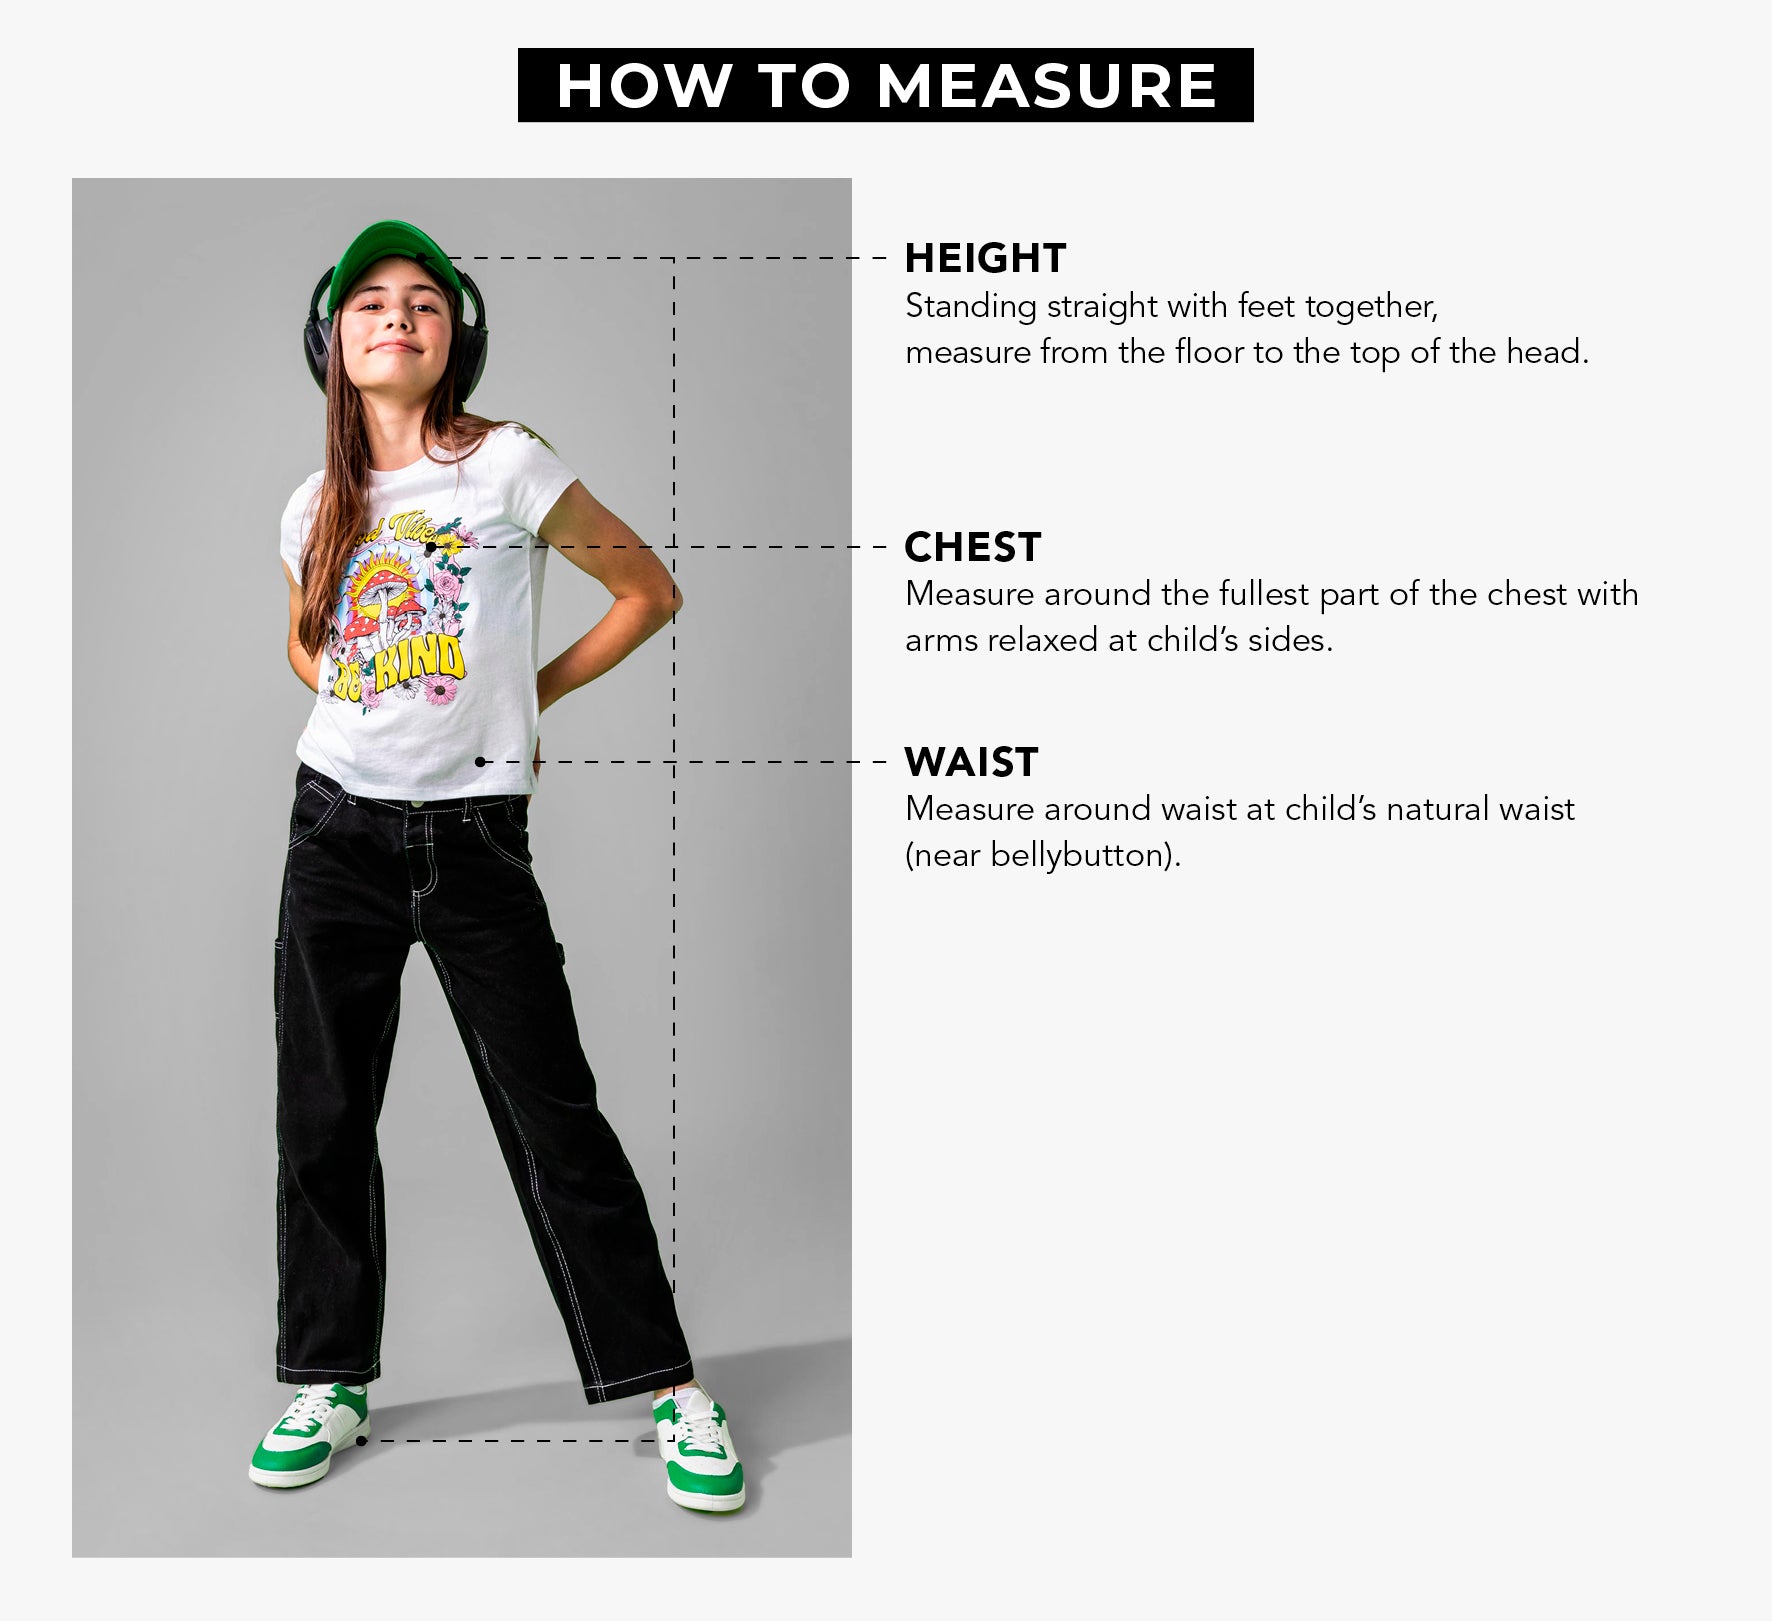 Urban Planet - Kids - Girls - How To Measure